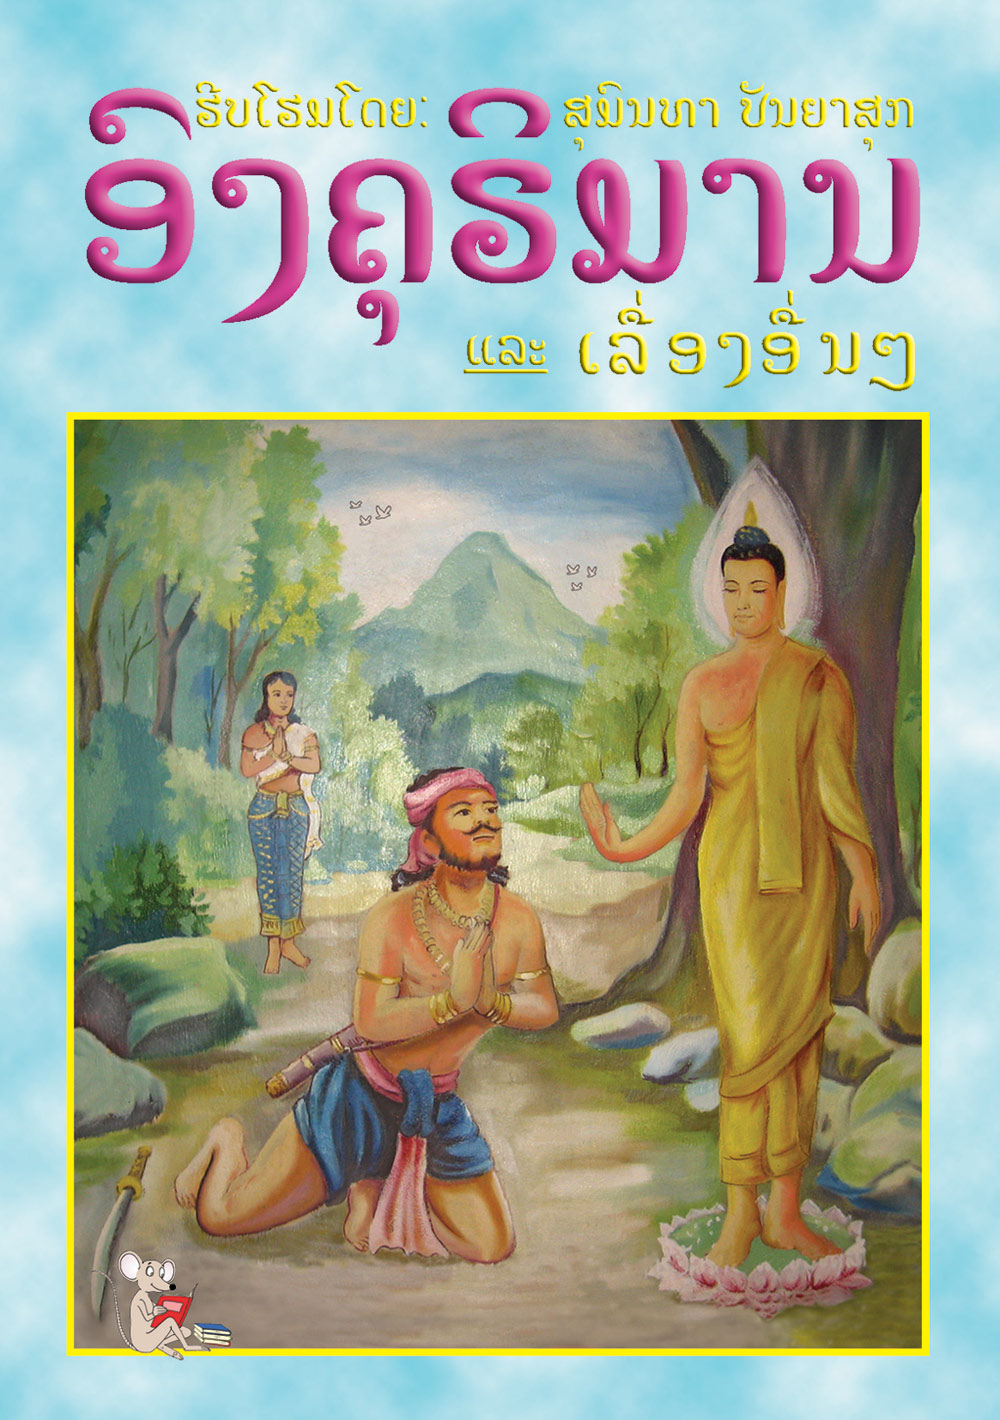 Ongkhuriman large book cover, published in Lao language